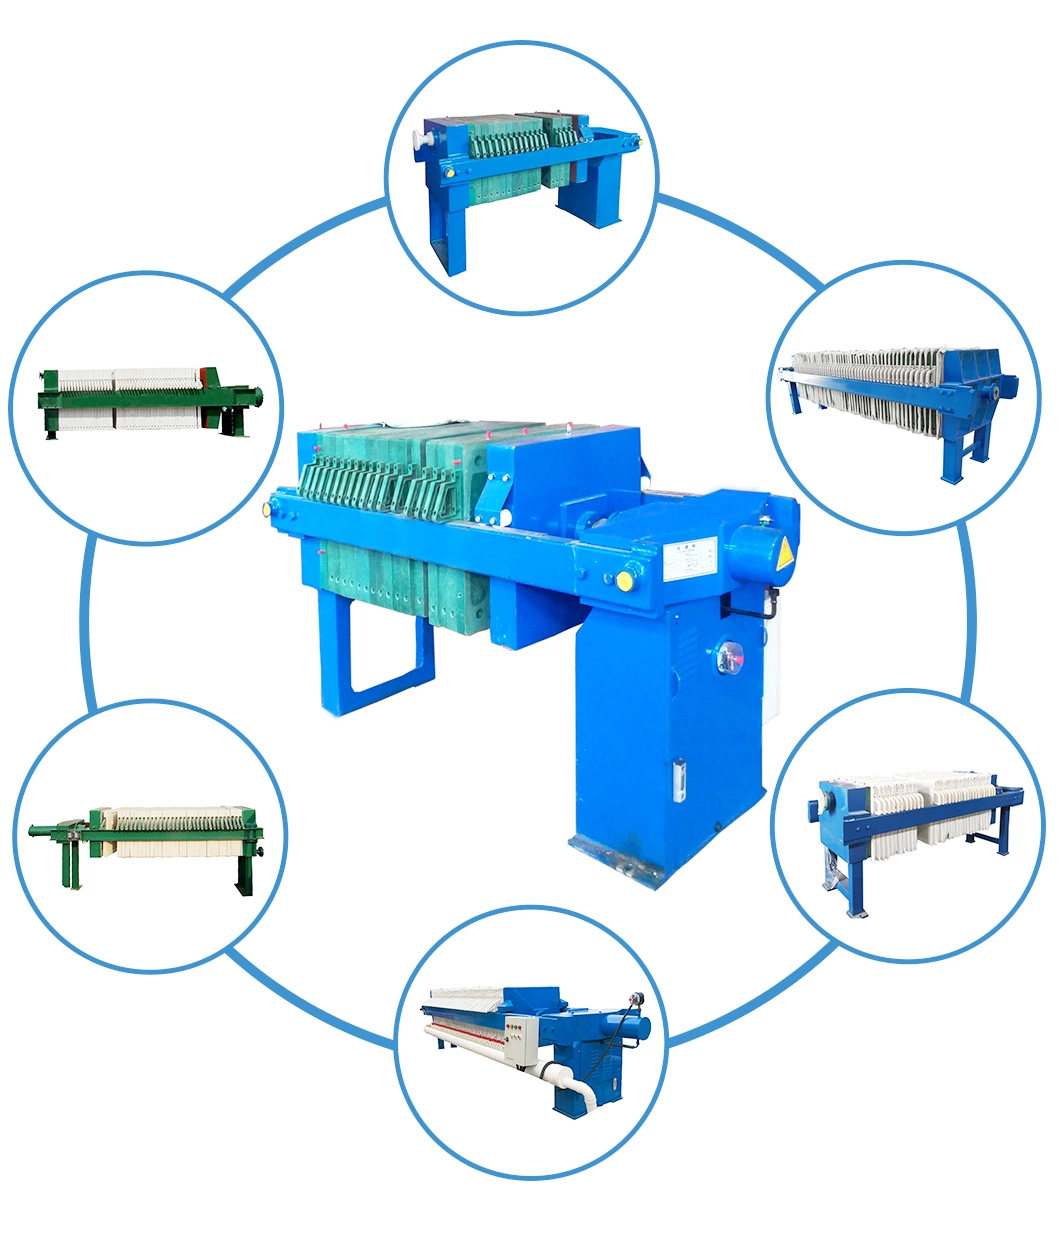 Customizable Industrial Wastewater Hydraulic Plate and Frame Filter Press